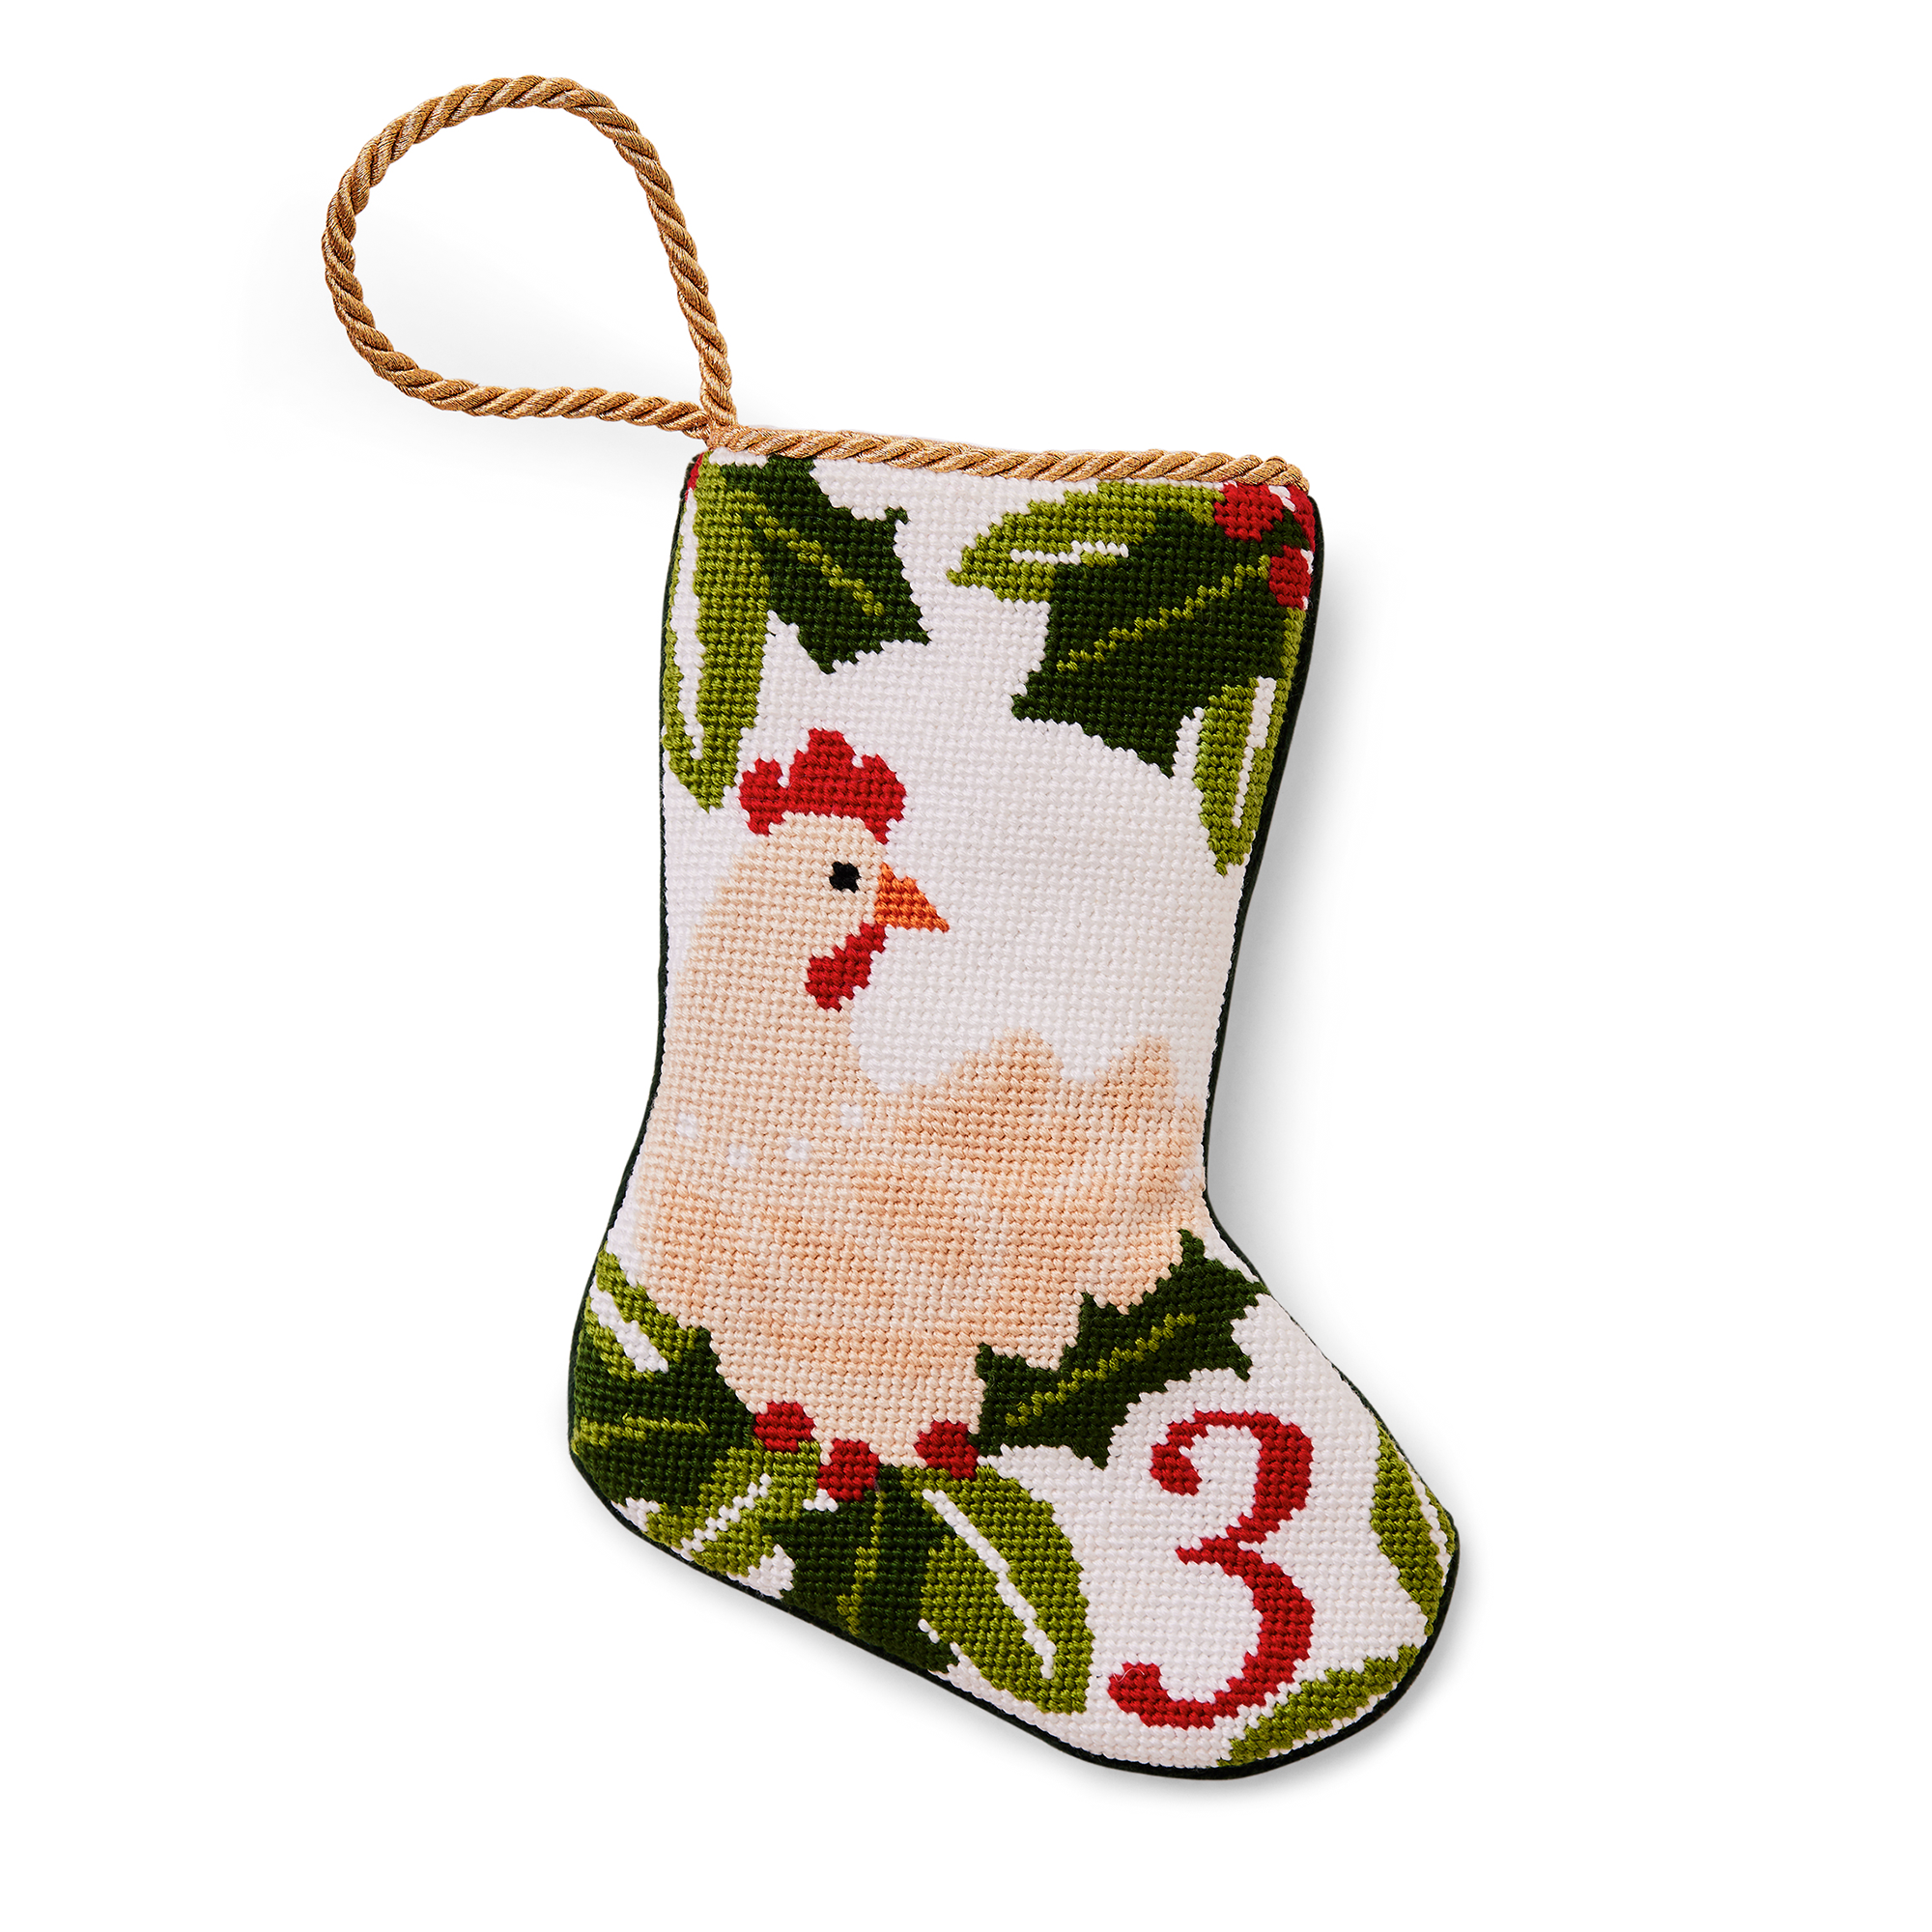 An intricately designed mini needlepoint stocking featuring the '3 French Hens' from the classic Christmas carol. This festive decoration adds a traditional and charming touch to your holiday decor. Perfect as tree ornaments, place settings, or for holding special gifts.